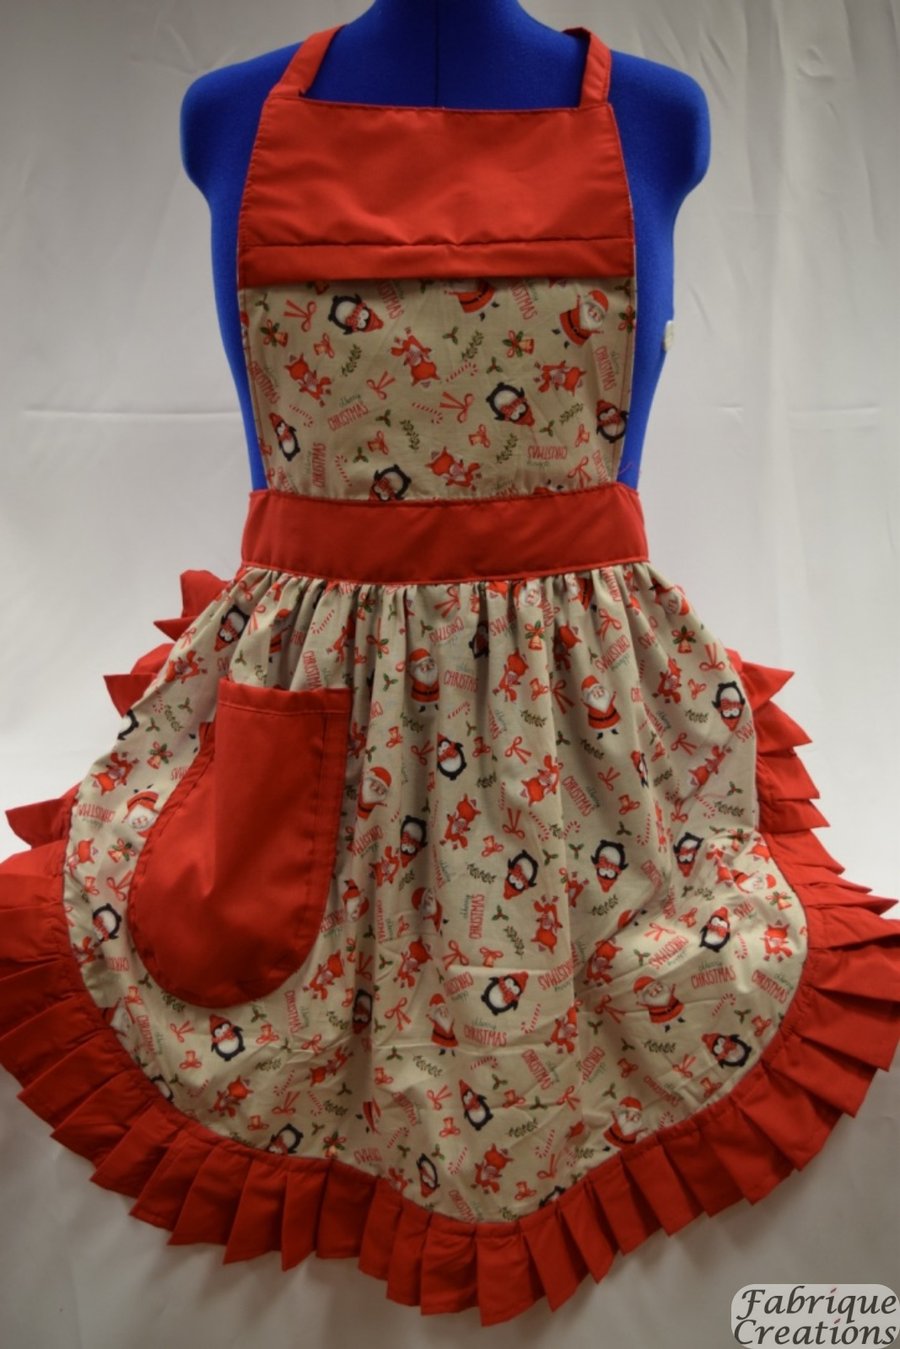 Vintage 50s Style Full Apron Pinny - Christmas Penguins on Grey with Red Trim